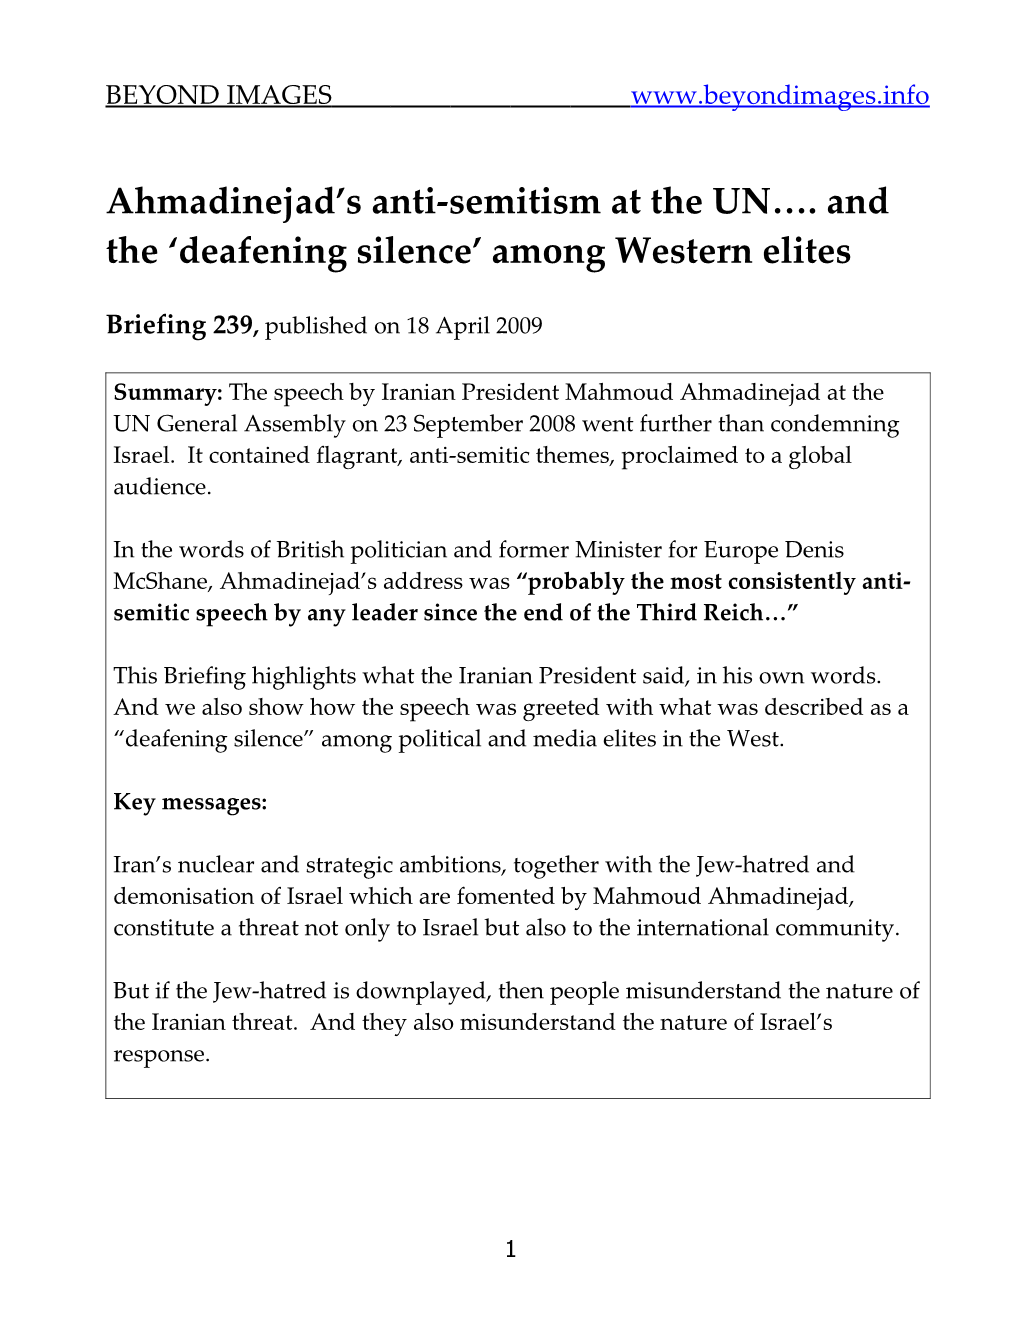 Ahmadinejad S Anti-Semitism at the UN . and the Deafening Silence Among Western Elites